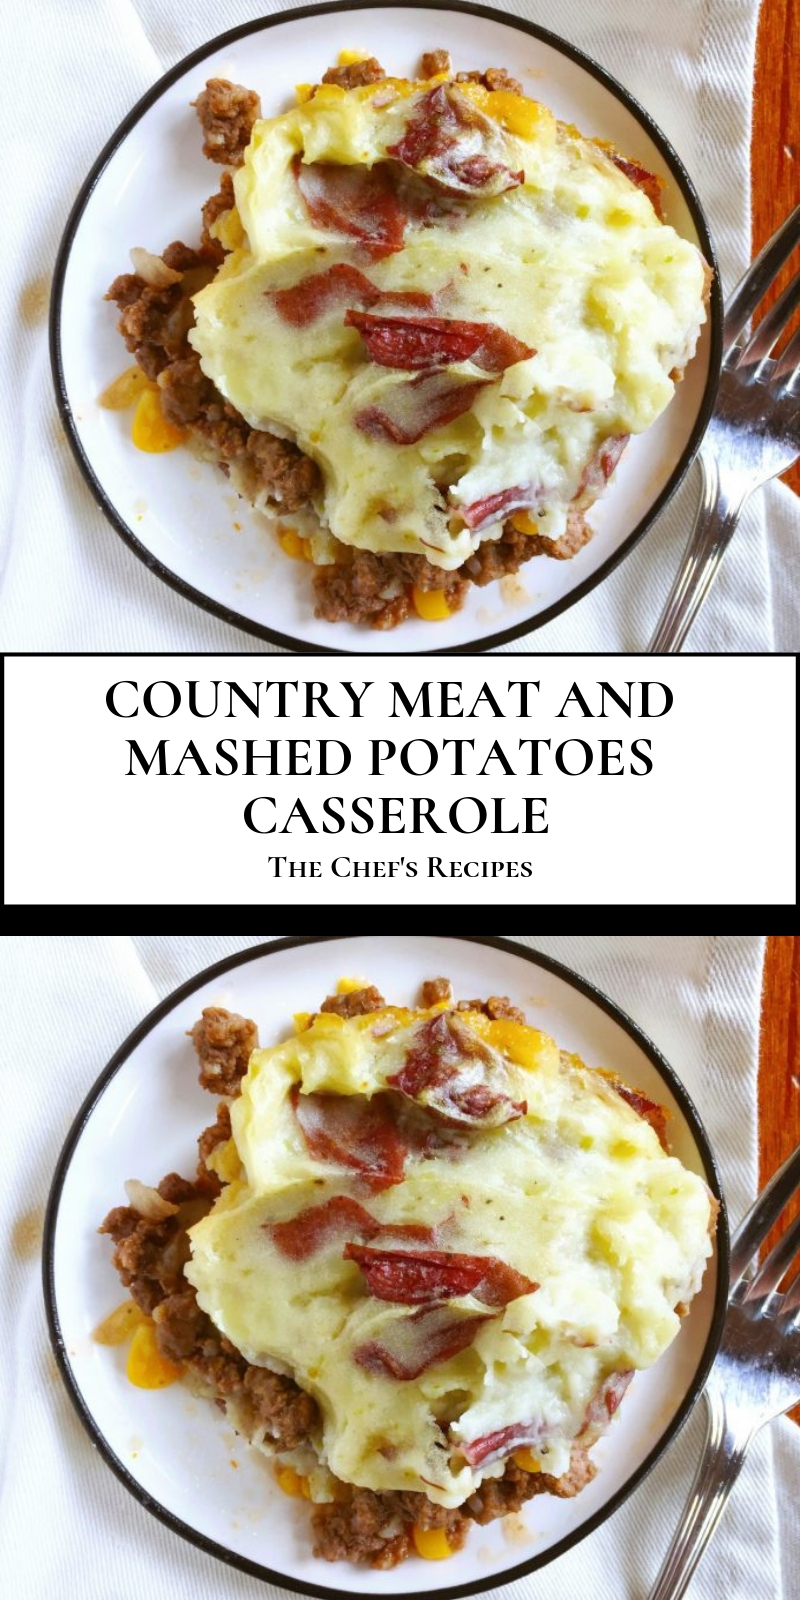 COUNTRY MEAT AND MASHED POTATOES CASSEROLE